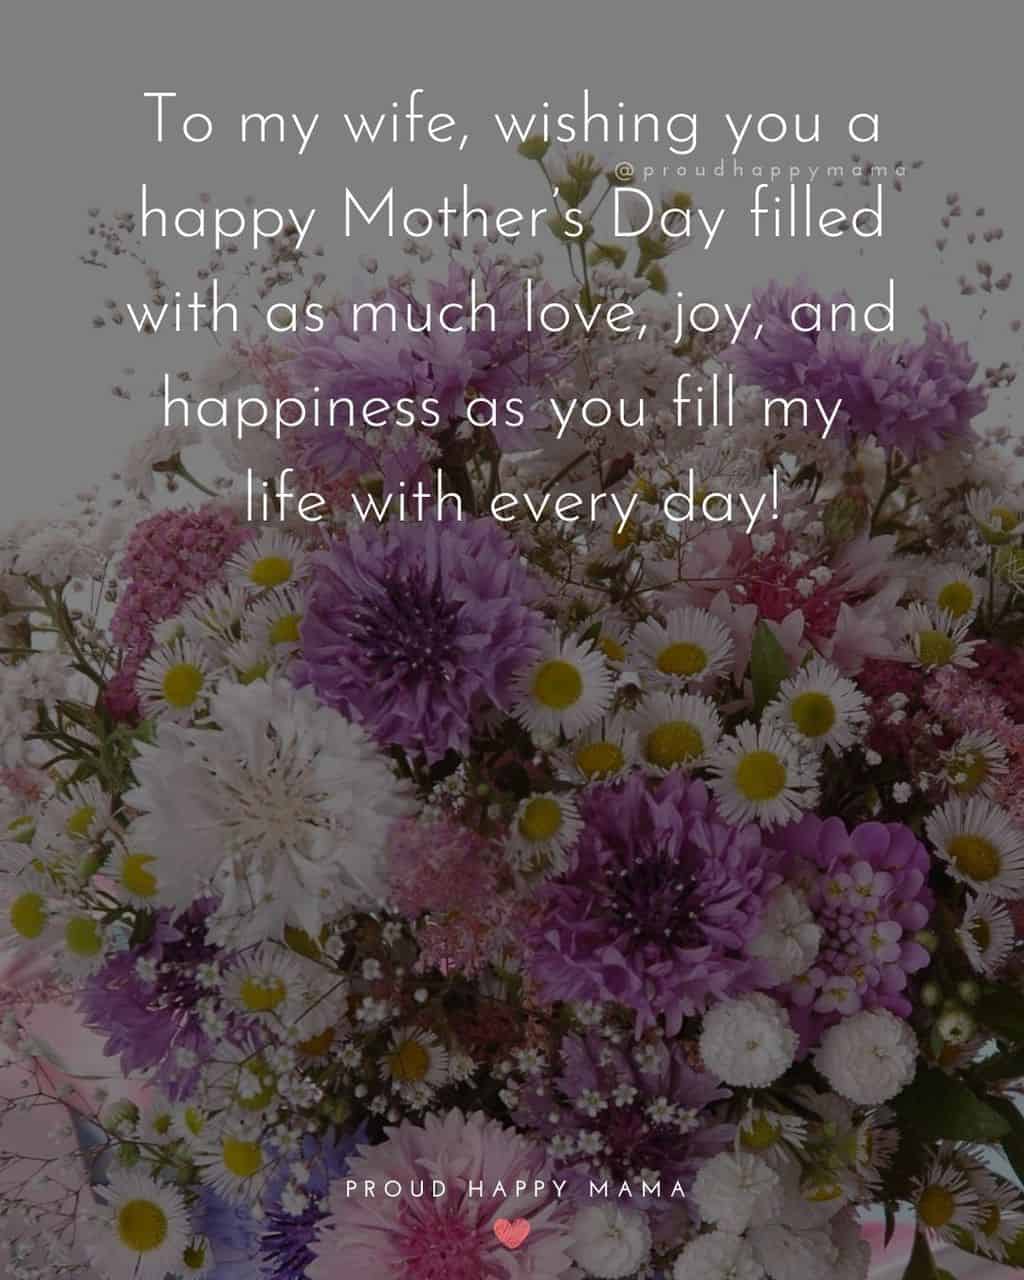 Happy Mothers Day Quotes For Wife - To my wife, wishing you a happy Mother’s Day filled with as much love, joy, and happiness